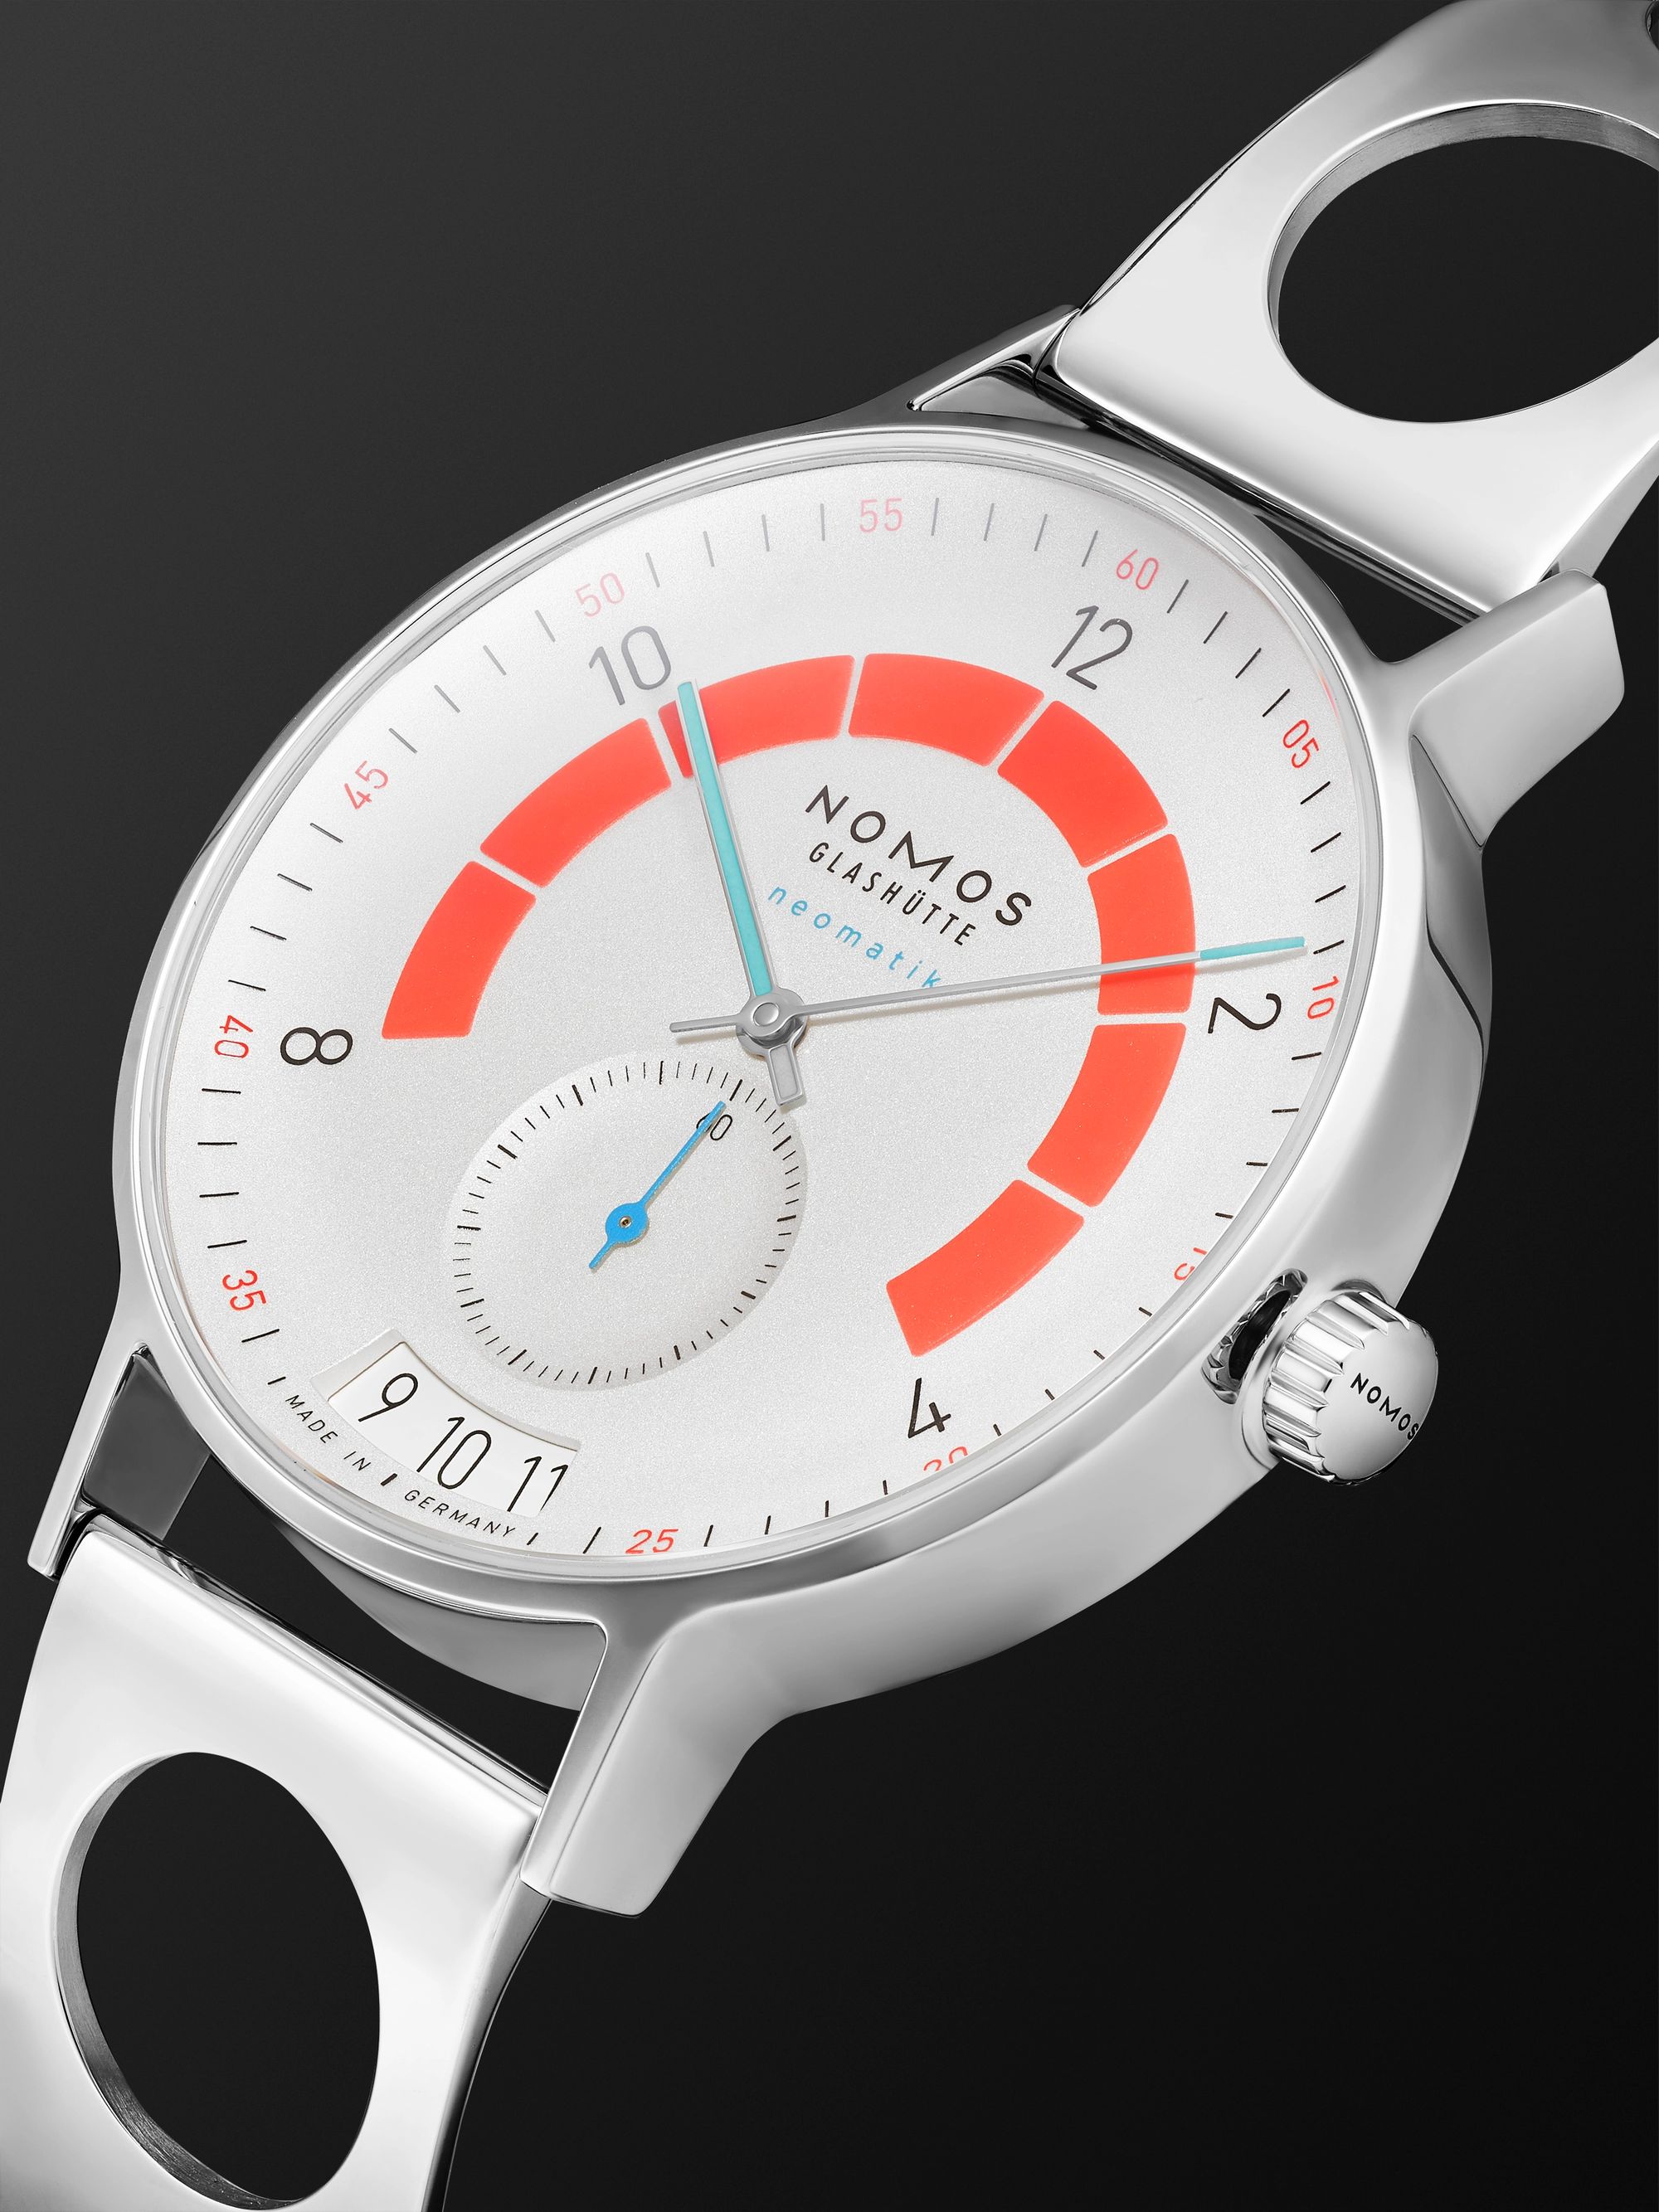 NOMOS GLASHÜTTE Autobahn Director's Cut A3 Limited Edition Automatic 41mm Stainless Steel Watch, Ref. No. 1301.S1